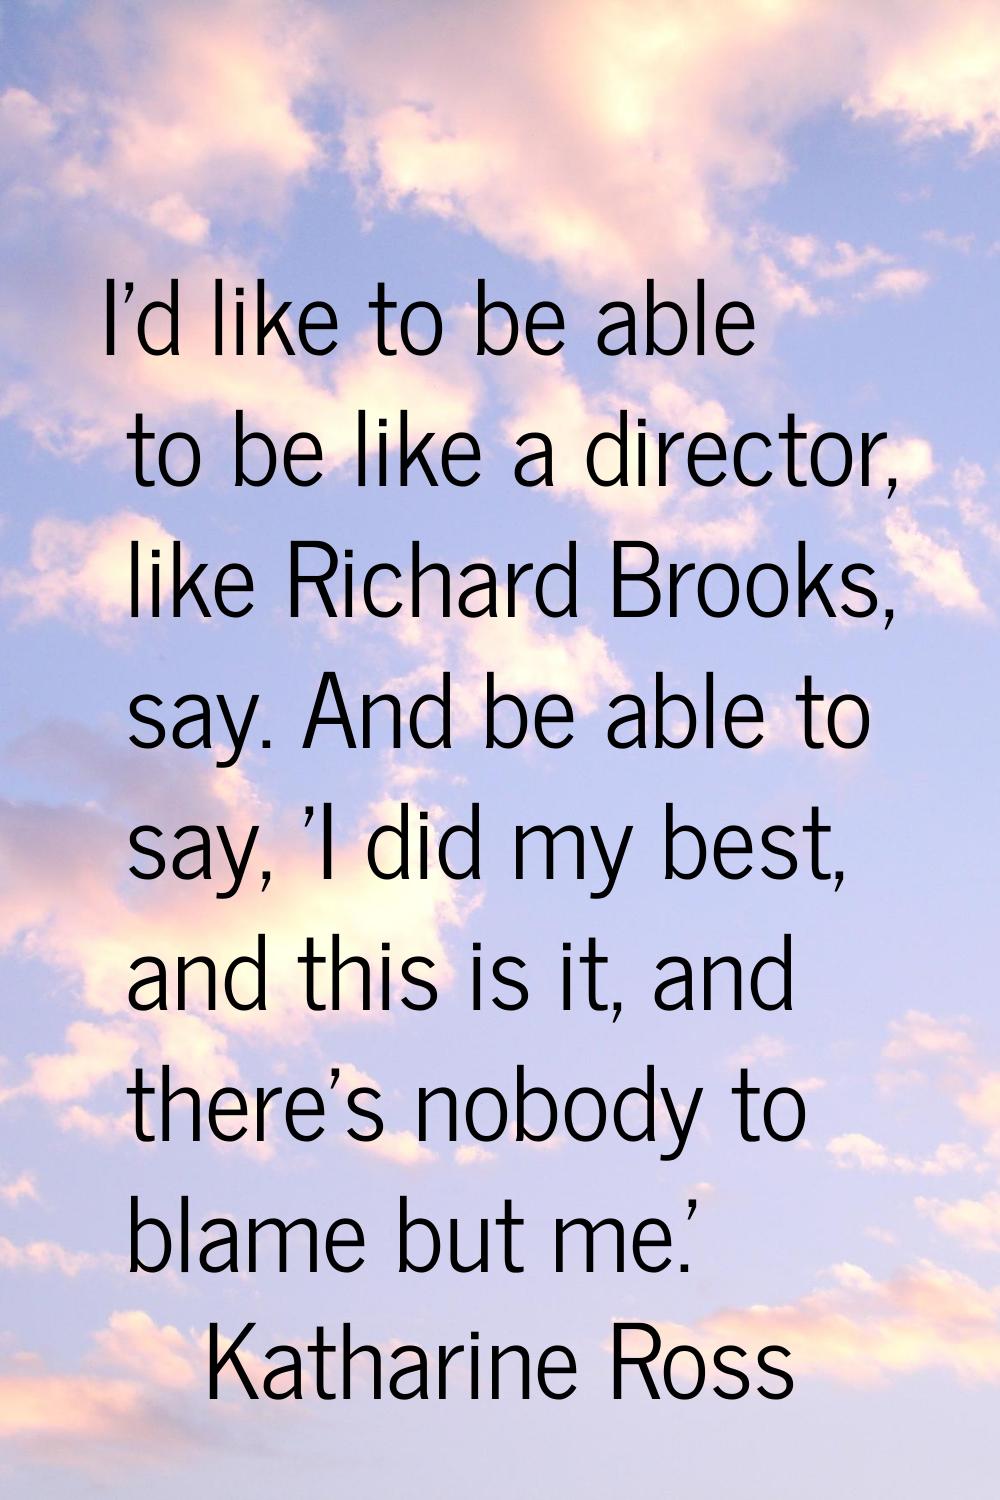 I'd like to be able to be like a director, like Richard Brooks, say. And be able to say, 'I did my 